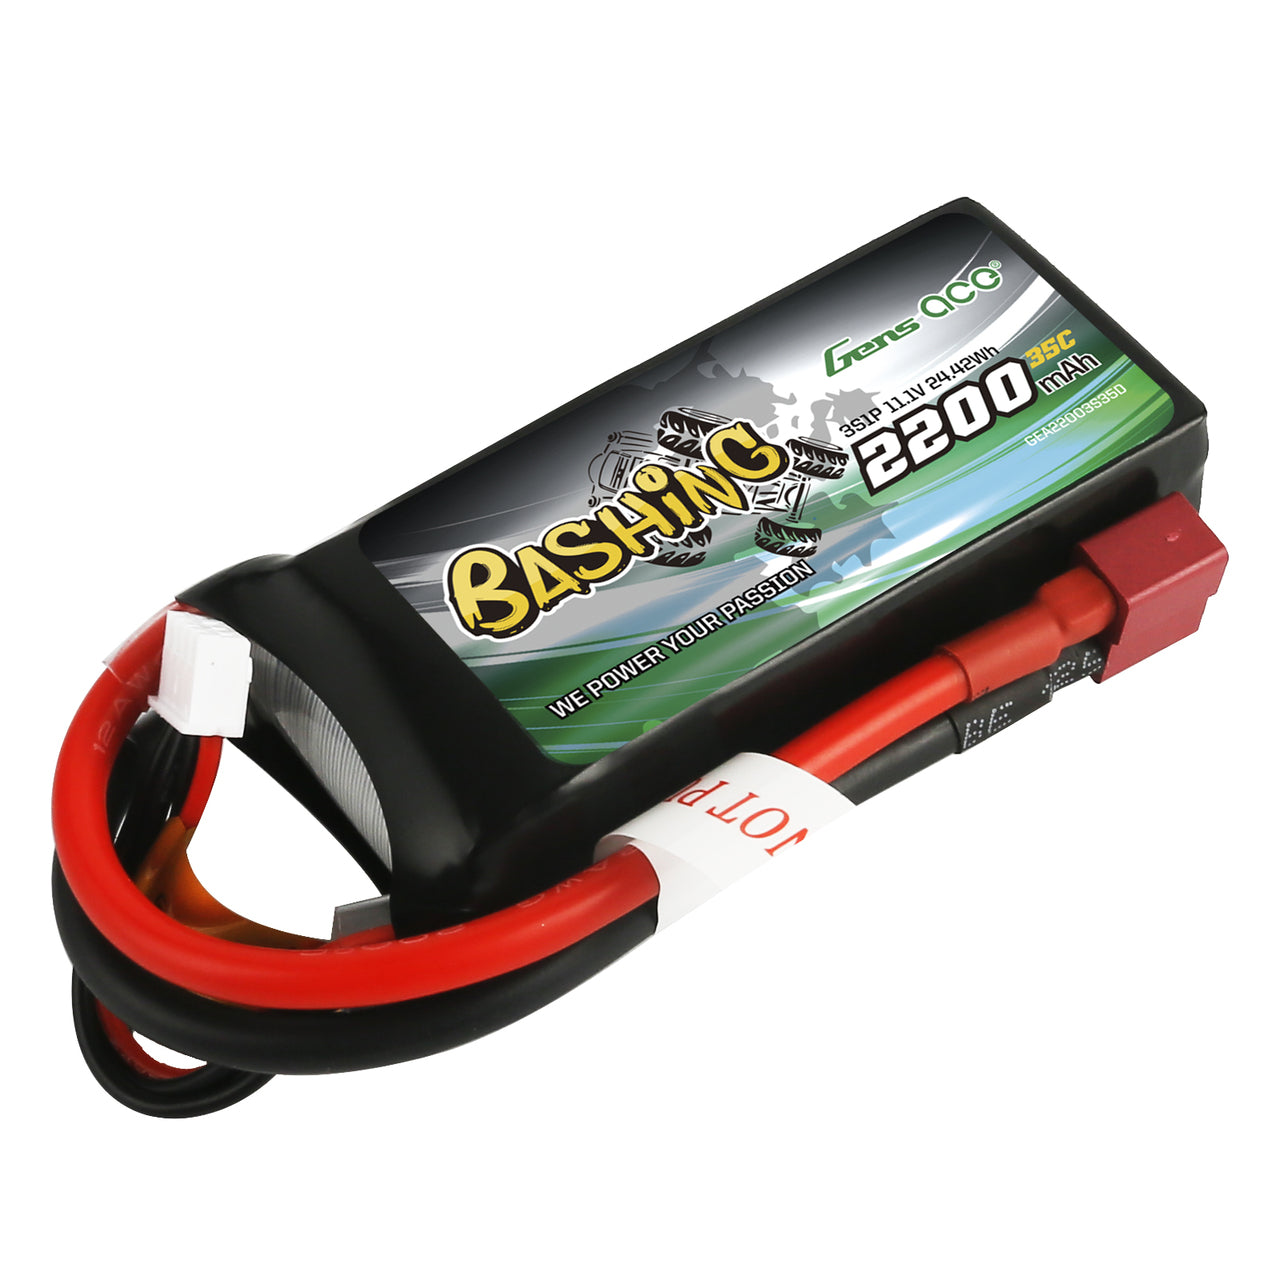 Gens Ace Bashing 2200mAh 11.1V 35C 3S1P Lipo Battery Pack With Deans Plug